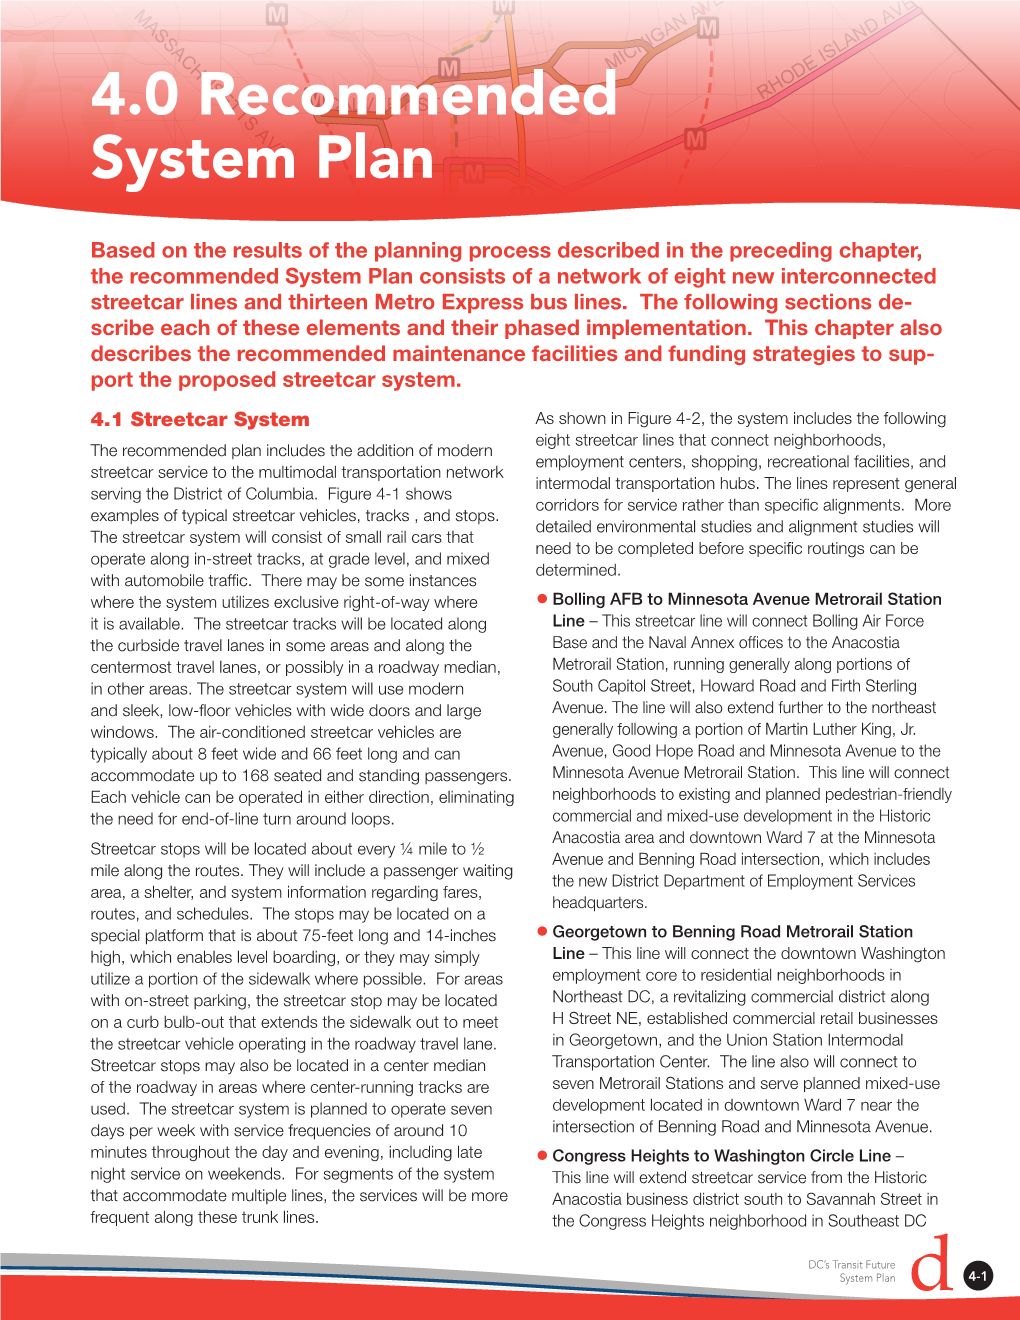 4.0 Recommended System Plan